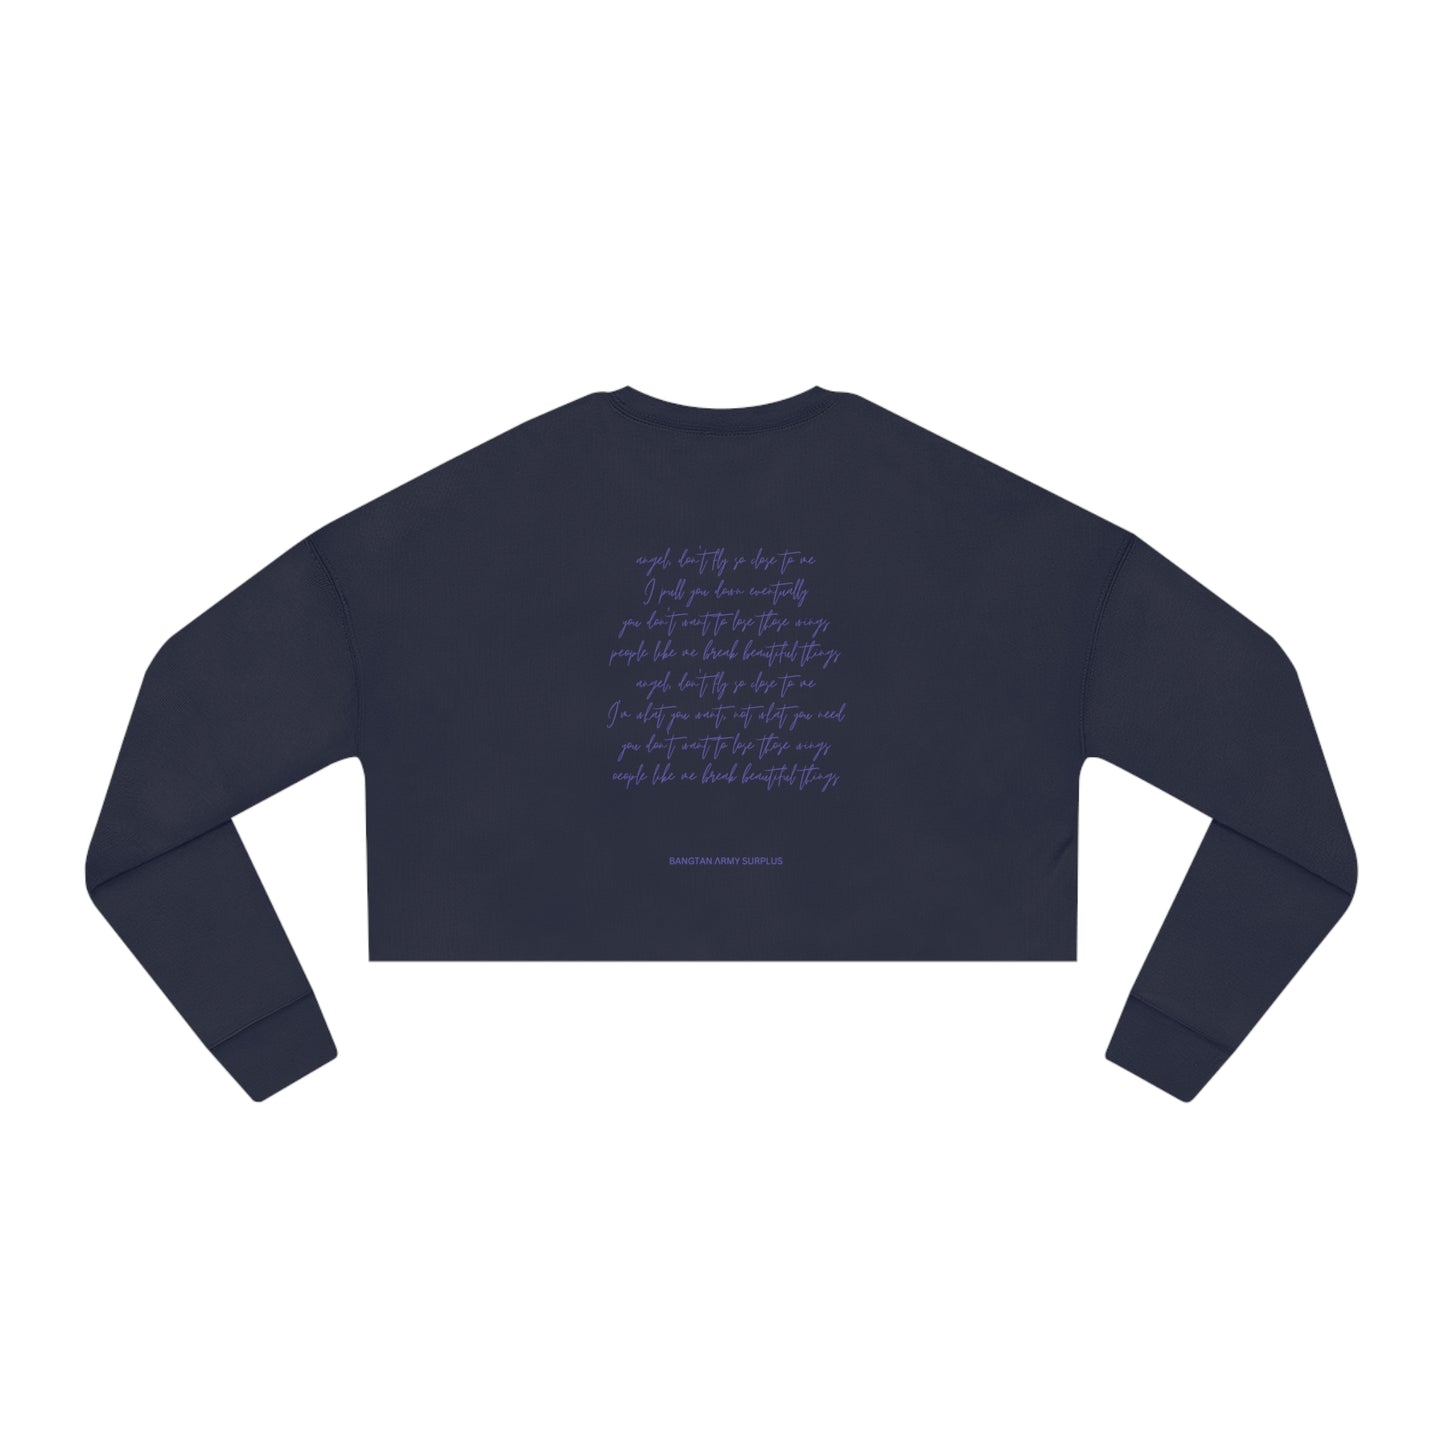 BTS JIMIN, Angel, don't fly so close to me. Women's Cropped Sweatshirt